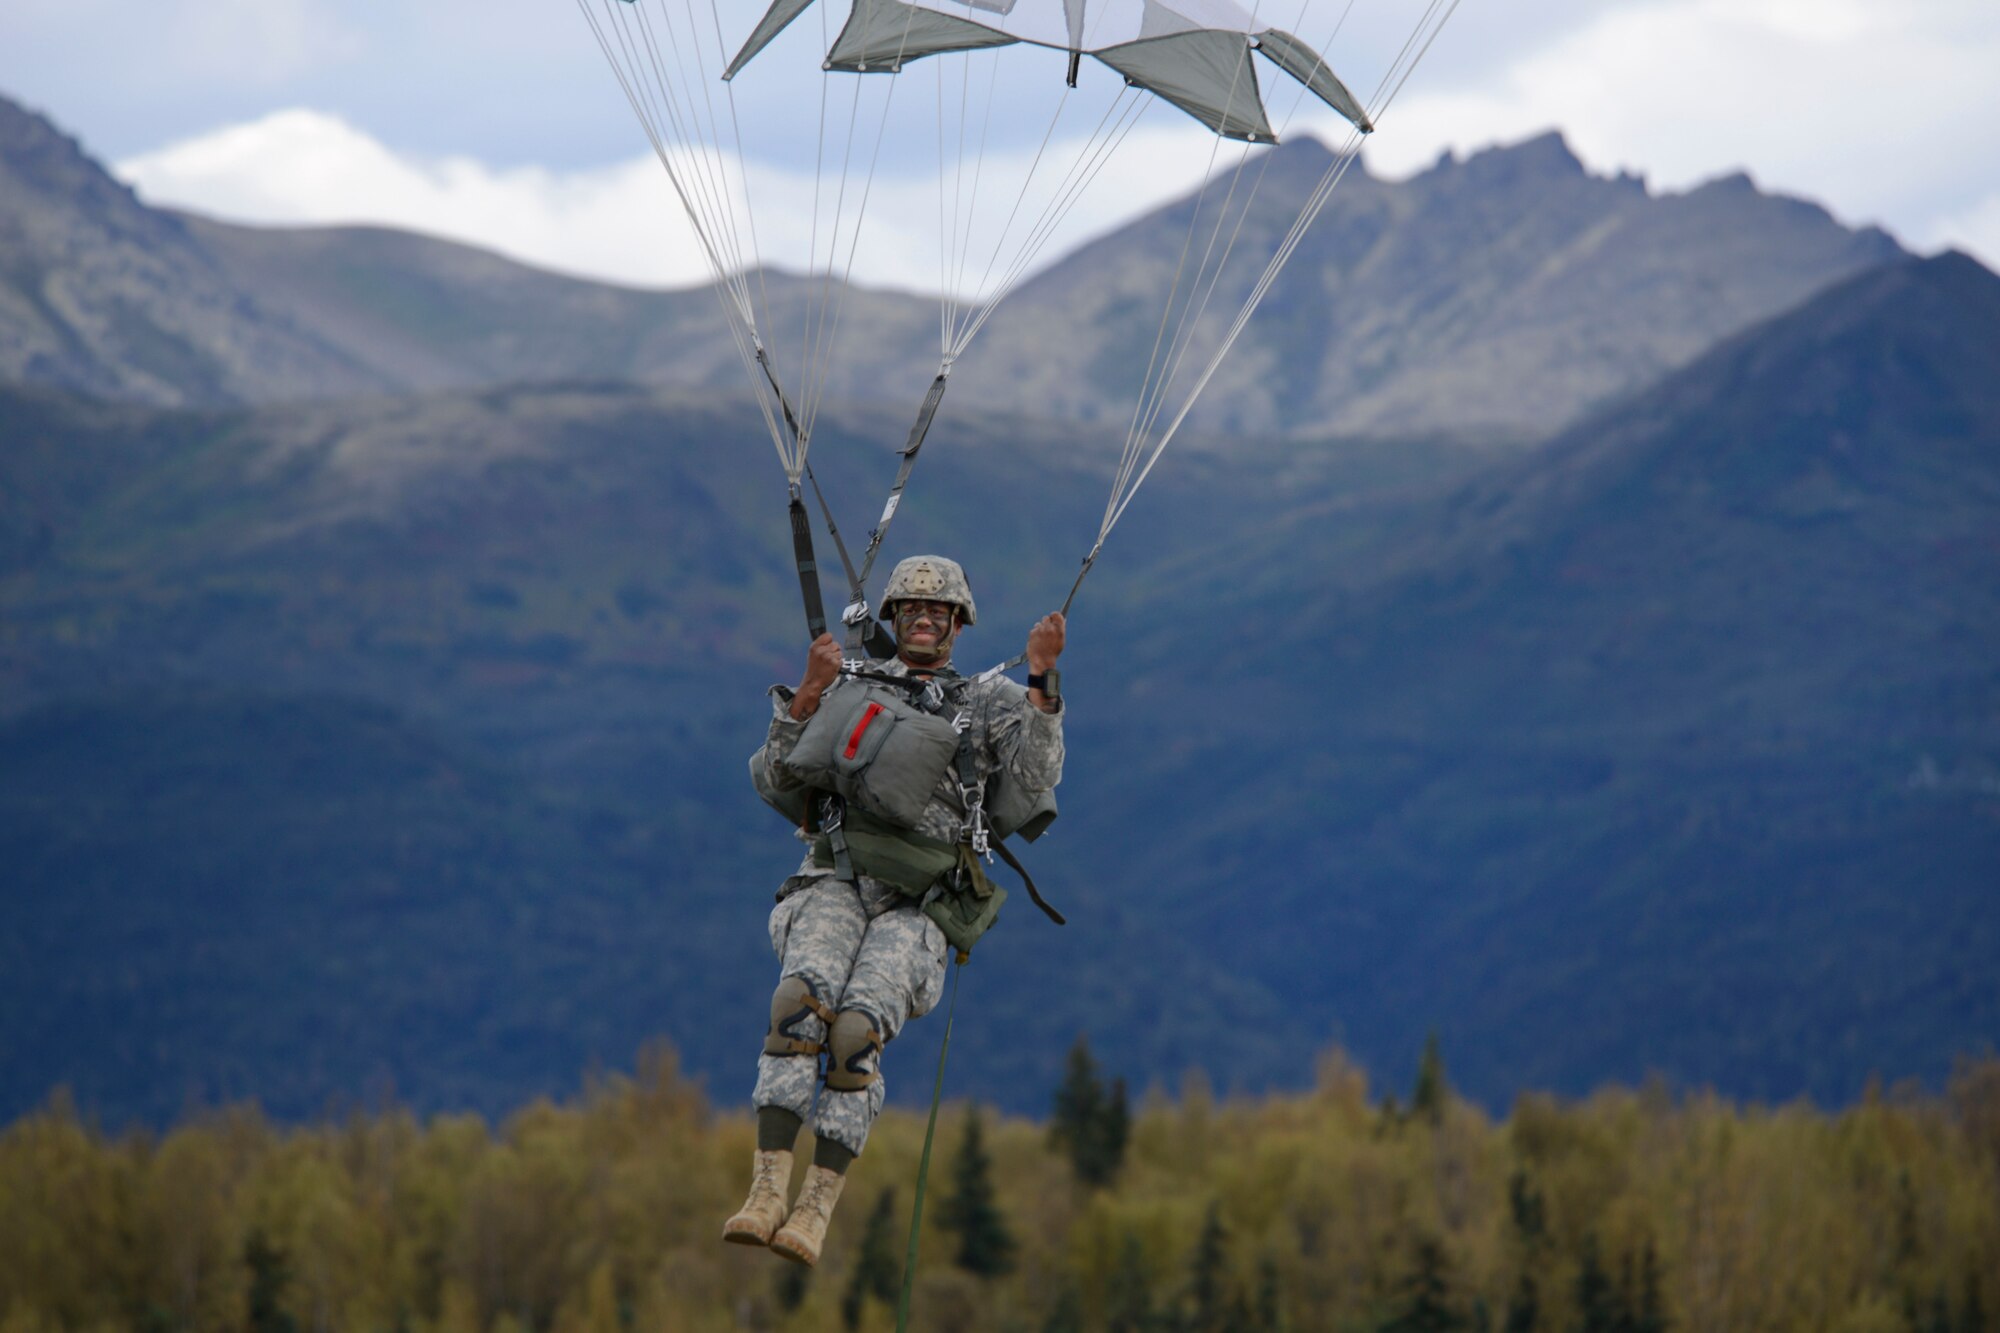 Army Staff Sgt. Kevin Brown, assigned to the 1st Battalion, 501st Parachute Infantry Regiment,4th Infantry Brigade Combat Team (Airborne), 25th Infantry Division, U.S. Army Alaska, prepares to land during a joint forcible entry exercise at Malemute Drop Zone on Joint Base Elmendorf-Richardson, Alaska, Aug. 23, 2016, as part of Exercise Spartan Agoge. Spartan Agoge is a brigade-level field training exercise that began Aug. 15, and focuses on an array of combat-related tasks from squad live-fire exercises to helicopter air insertion and airborne assault training. (U.S. Air Force photo by Airman 1st Class Valerie Monroy)